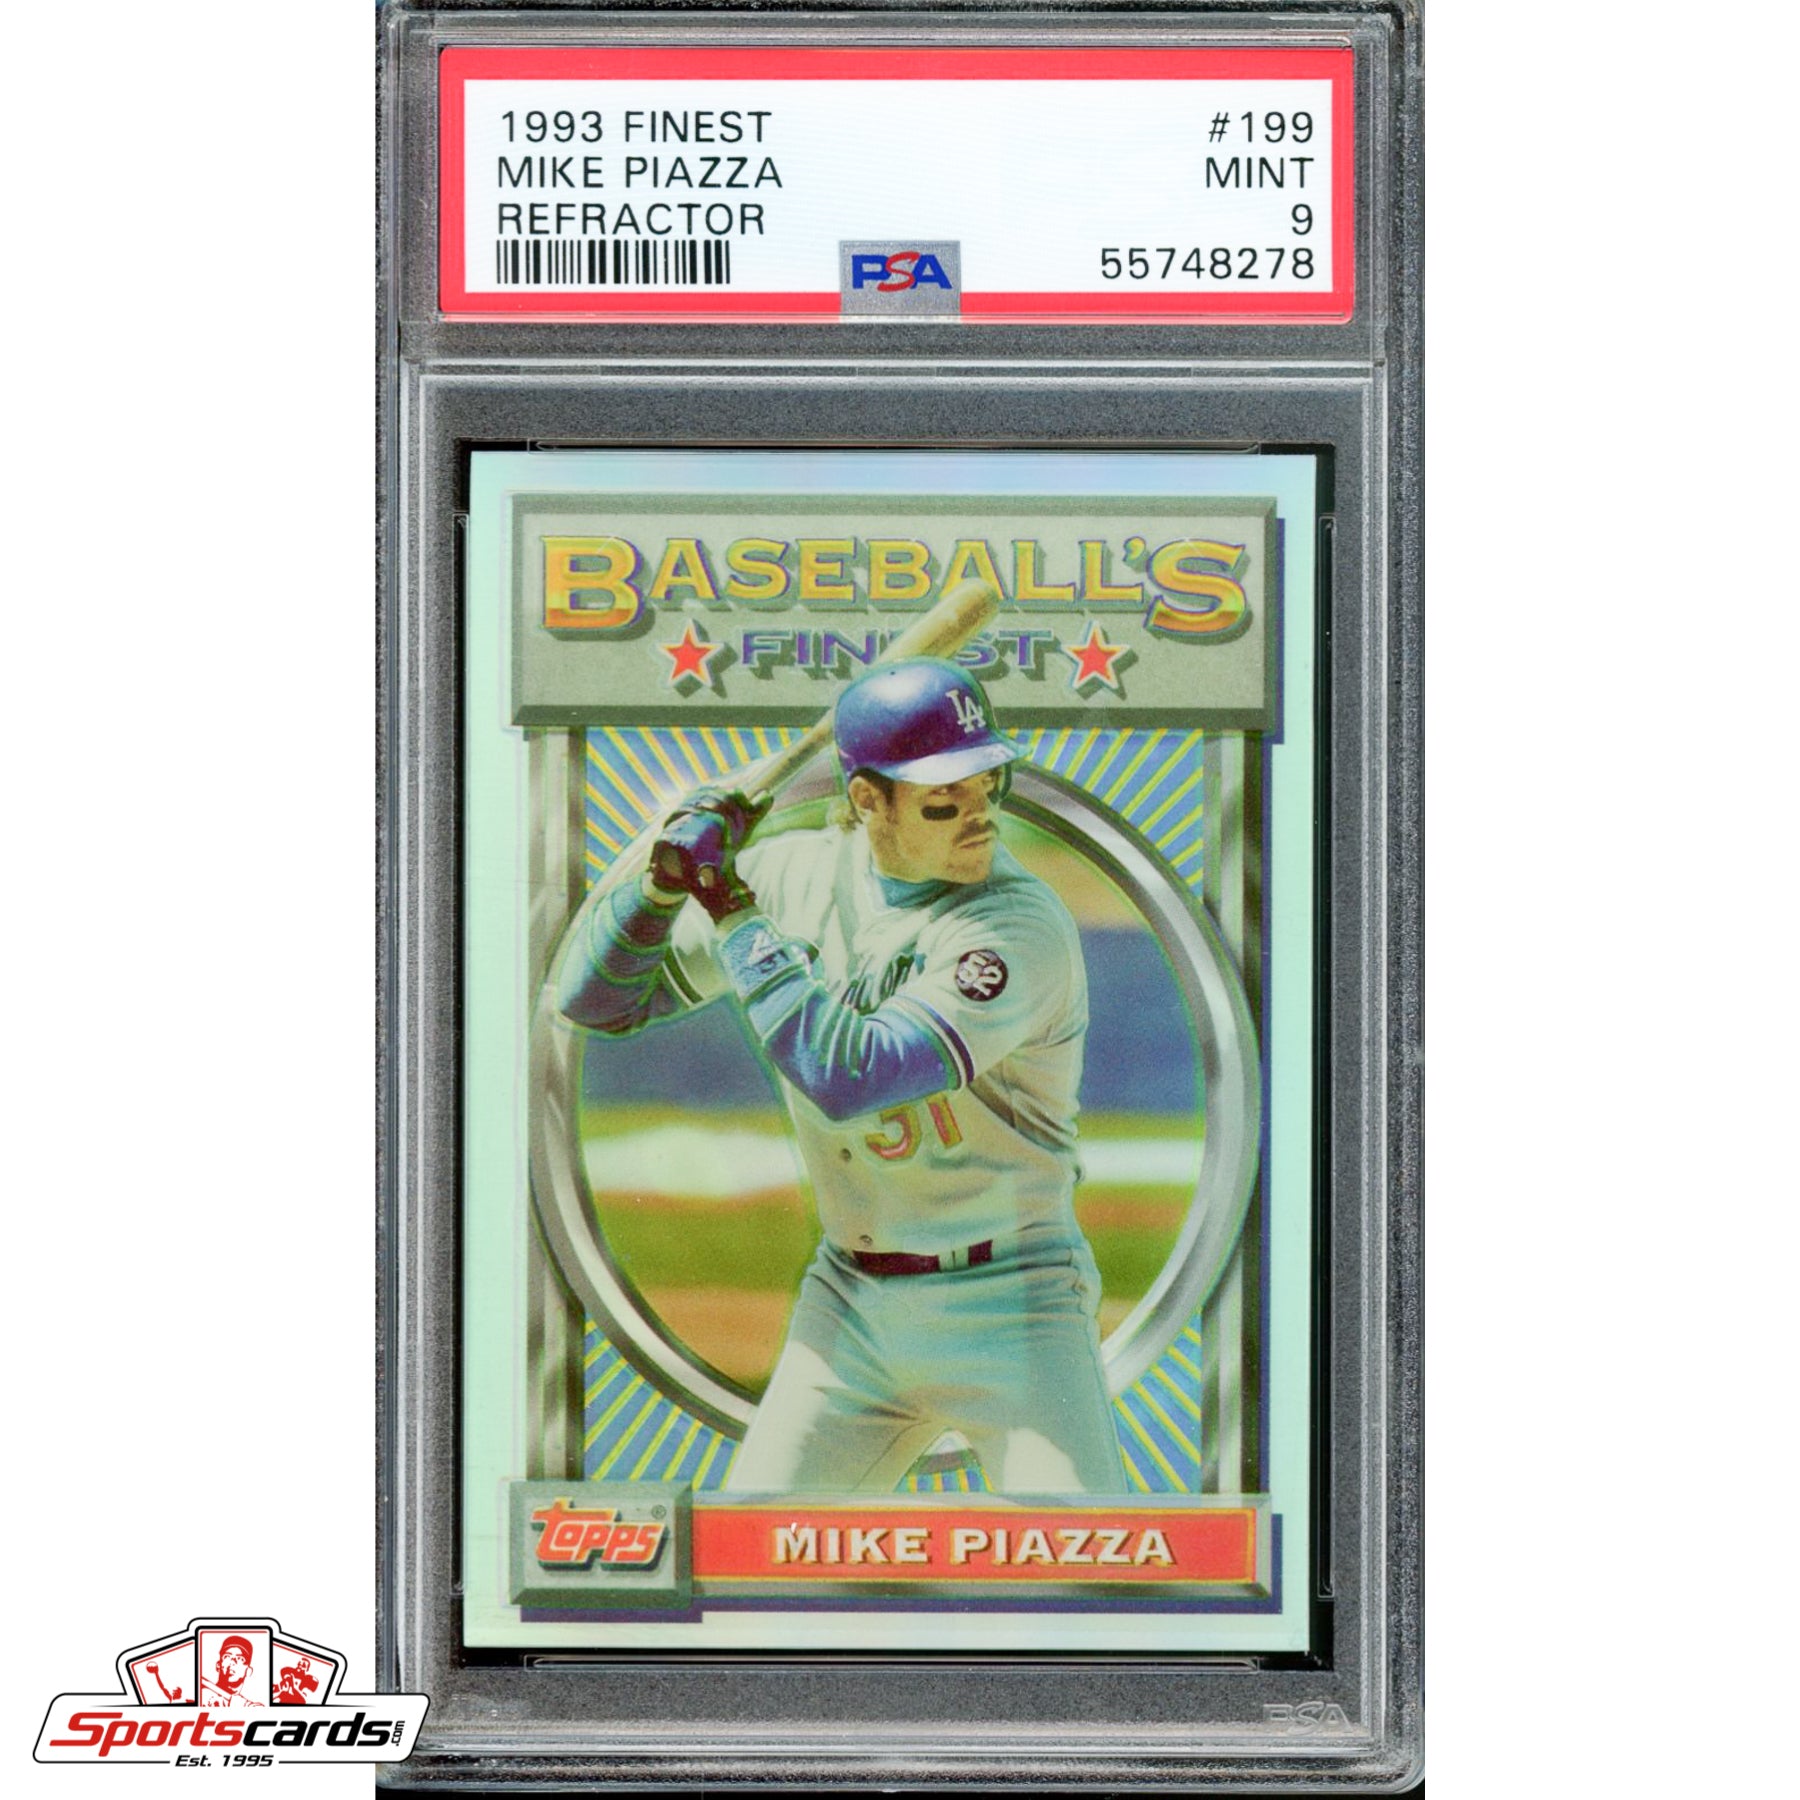 1993 Finest Mike Piazza Refractor #199 PSA 9